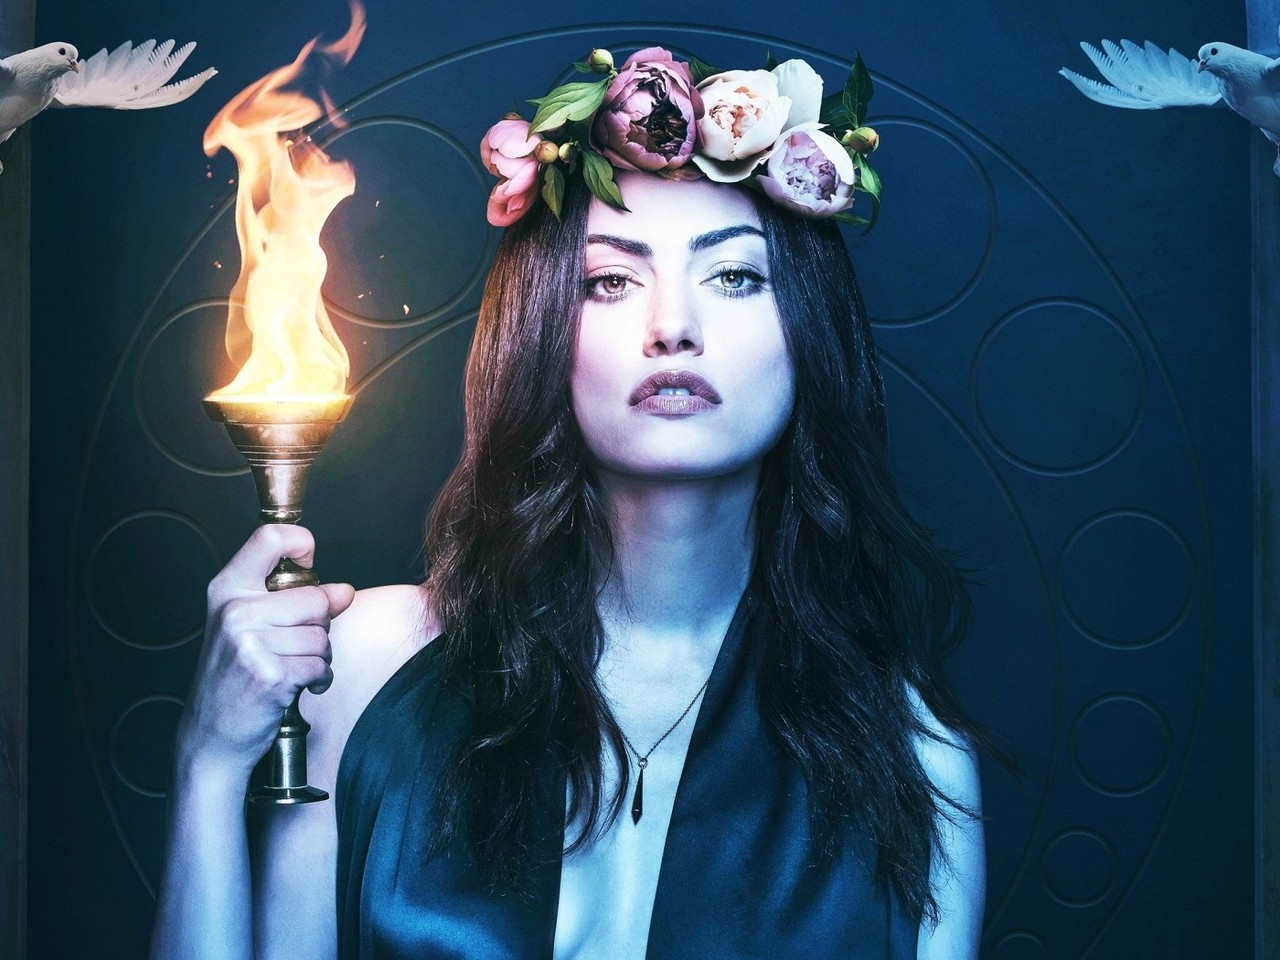 The Originals Phoebe Tonkin  for 1280 x 960 resolution